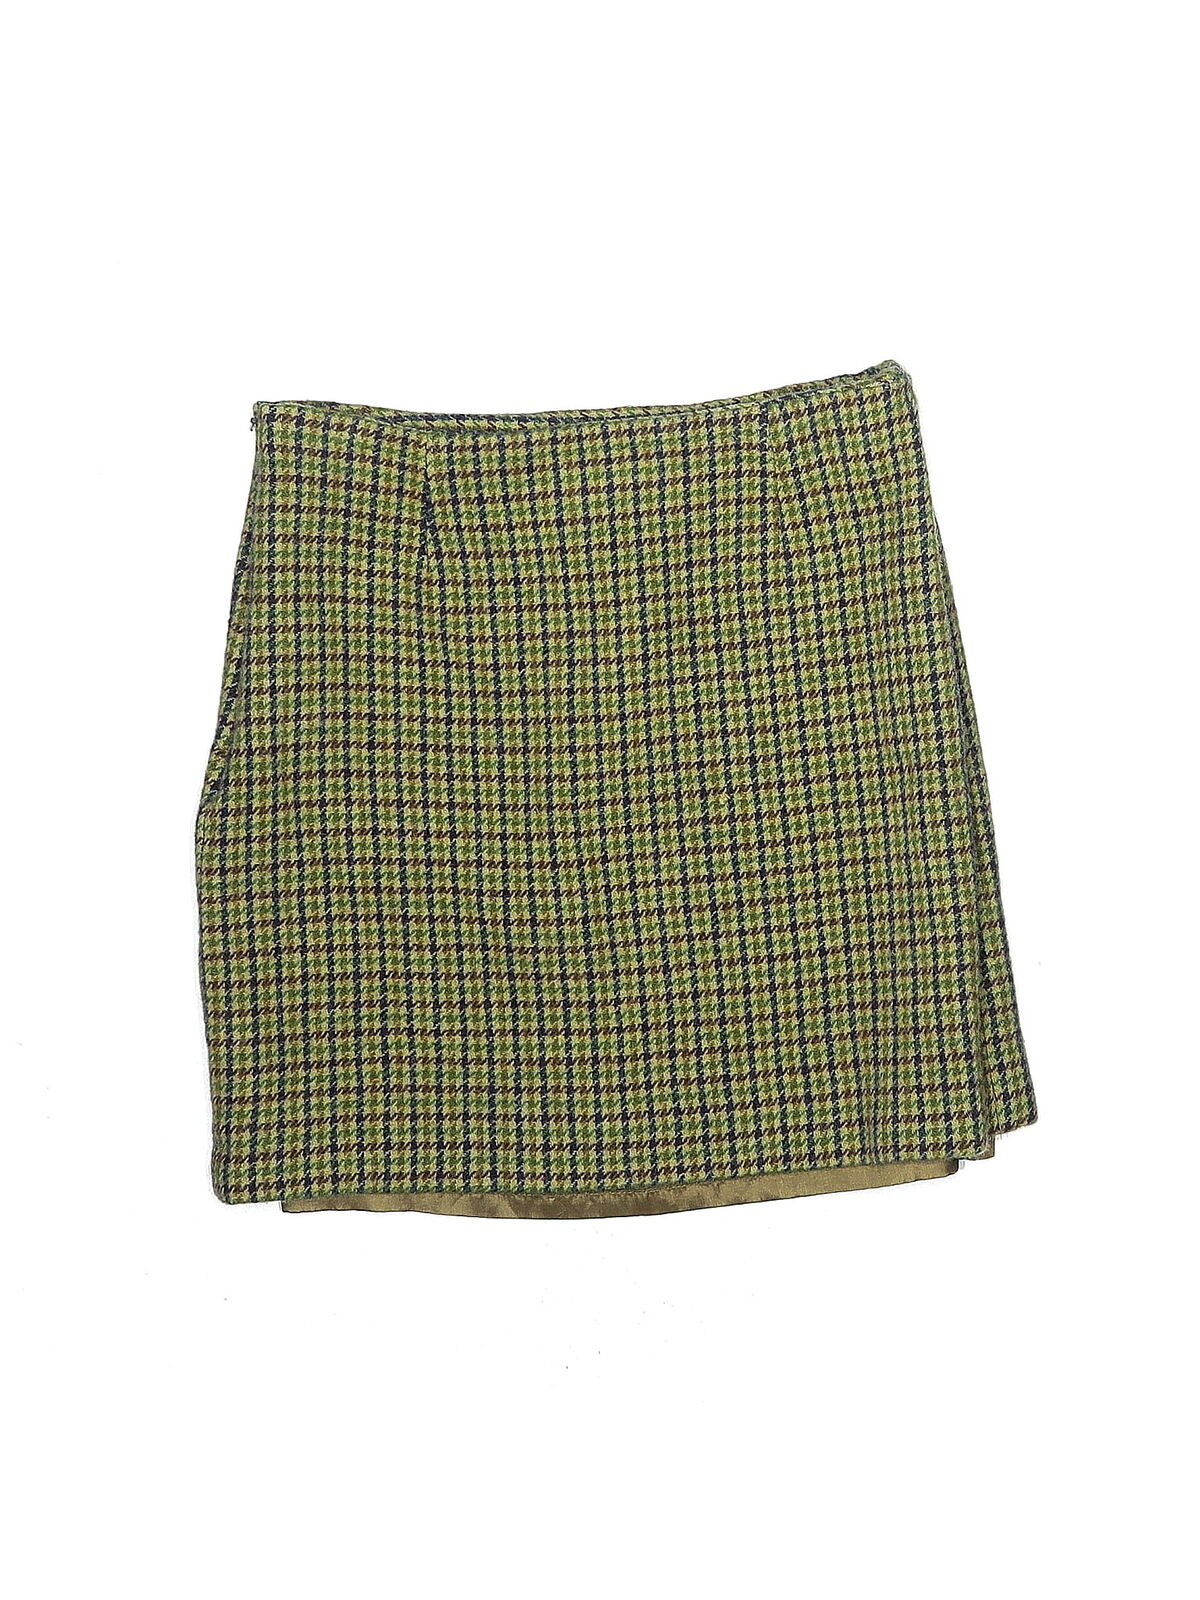 French Connection Women Green Wool Skirt 8 - image 2